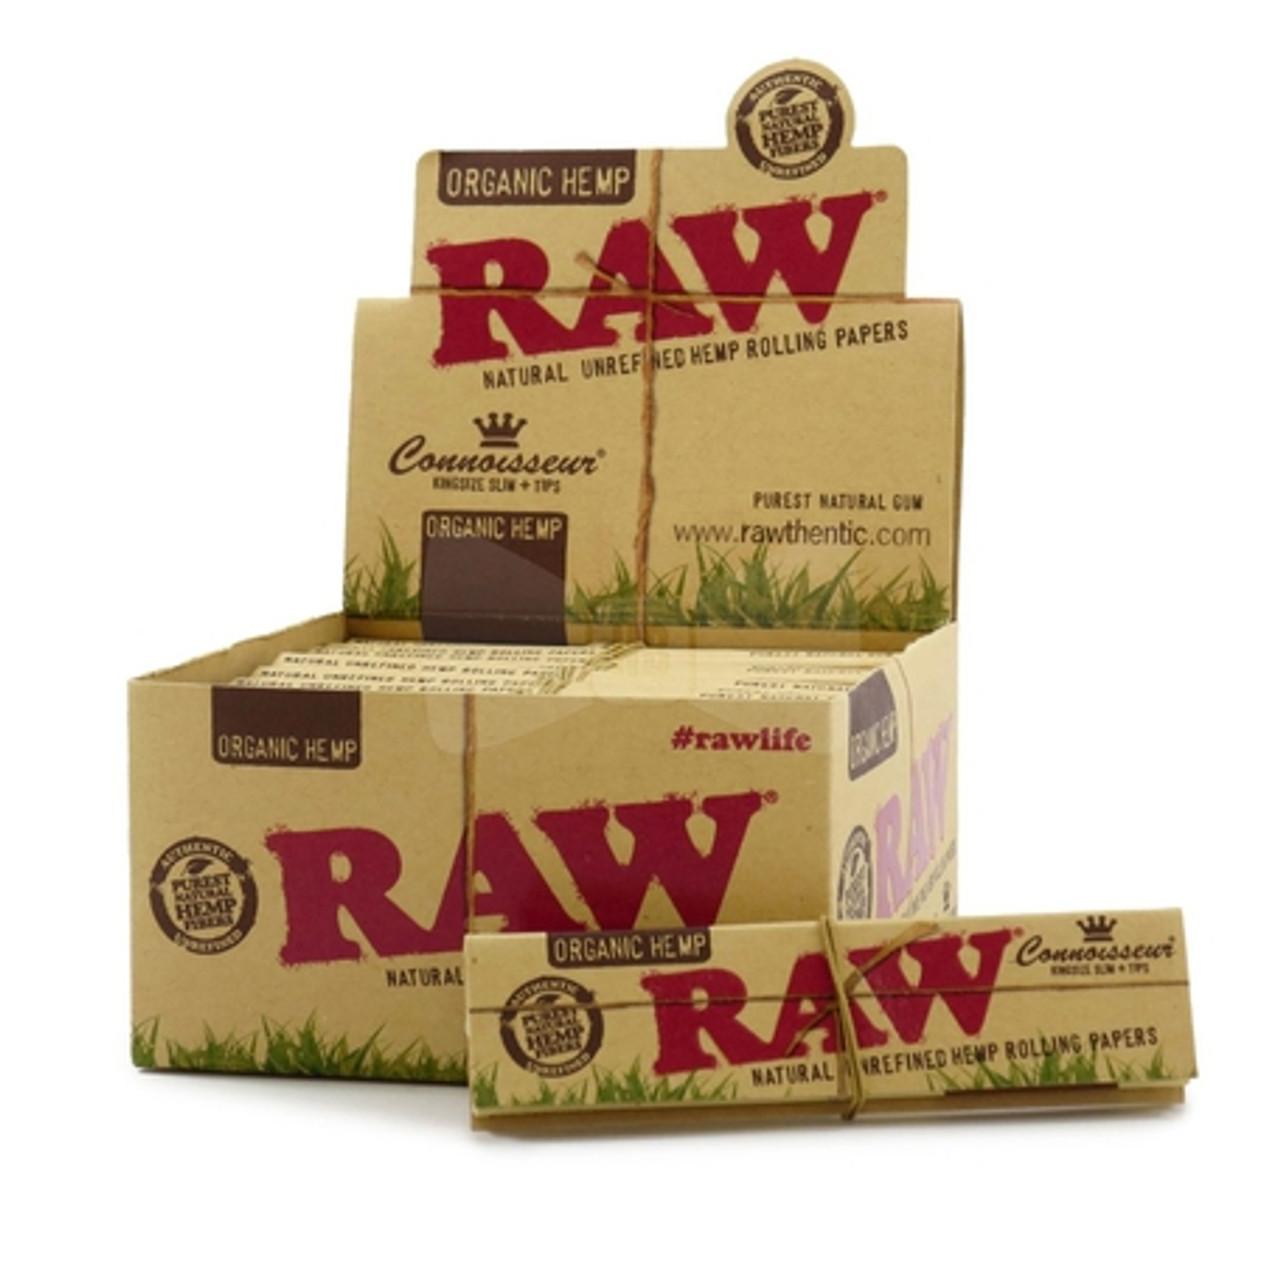 PAPEL RAW CLASSIC CONNOISSEUR KING C/ TIPS PRE ROLLED - 4:20 Hemp Shop